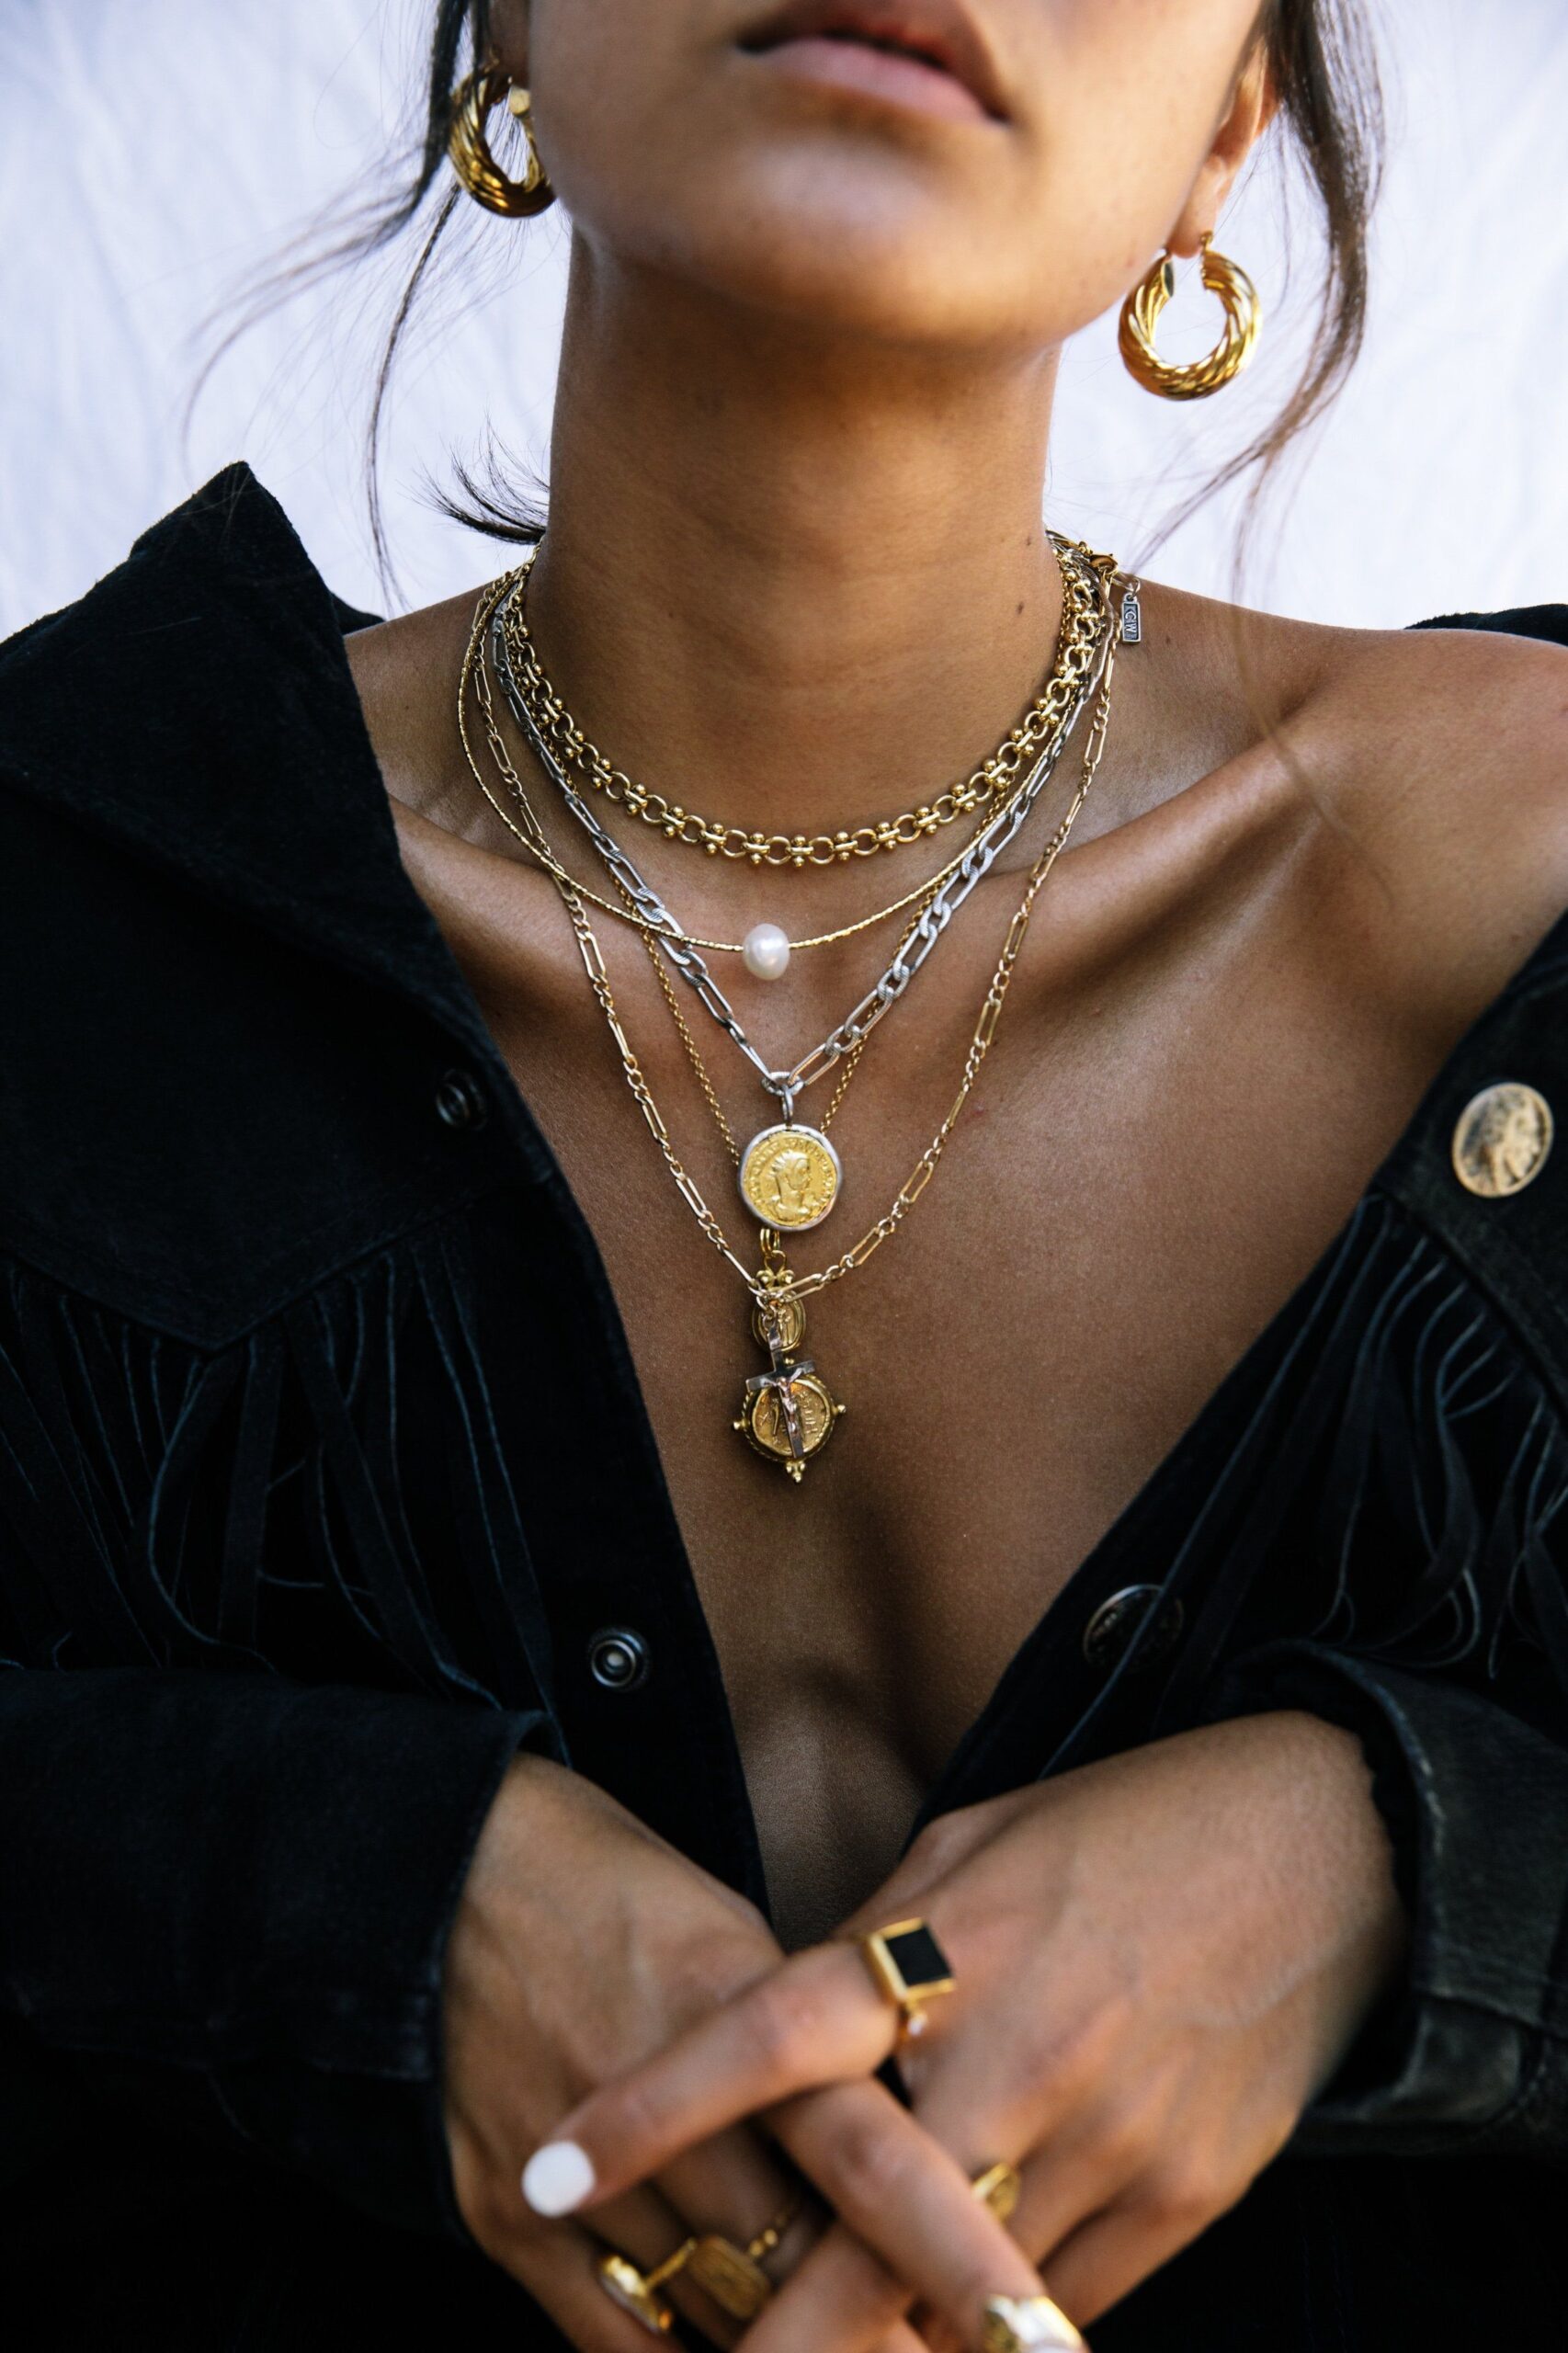 These long chain necklace are in high trend